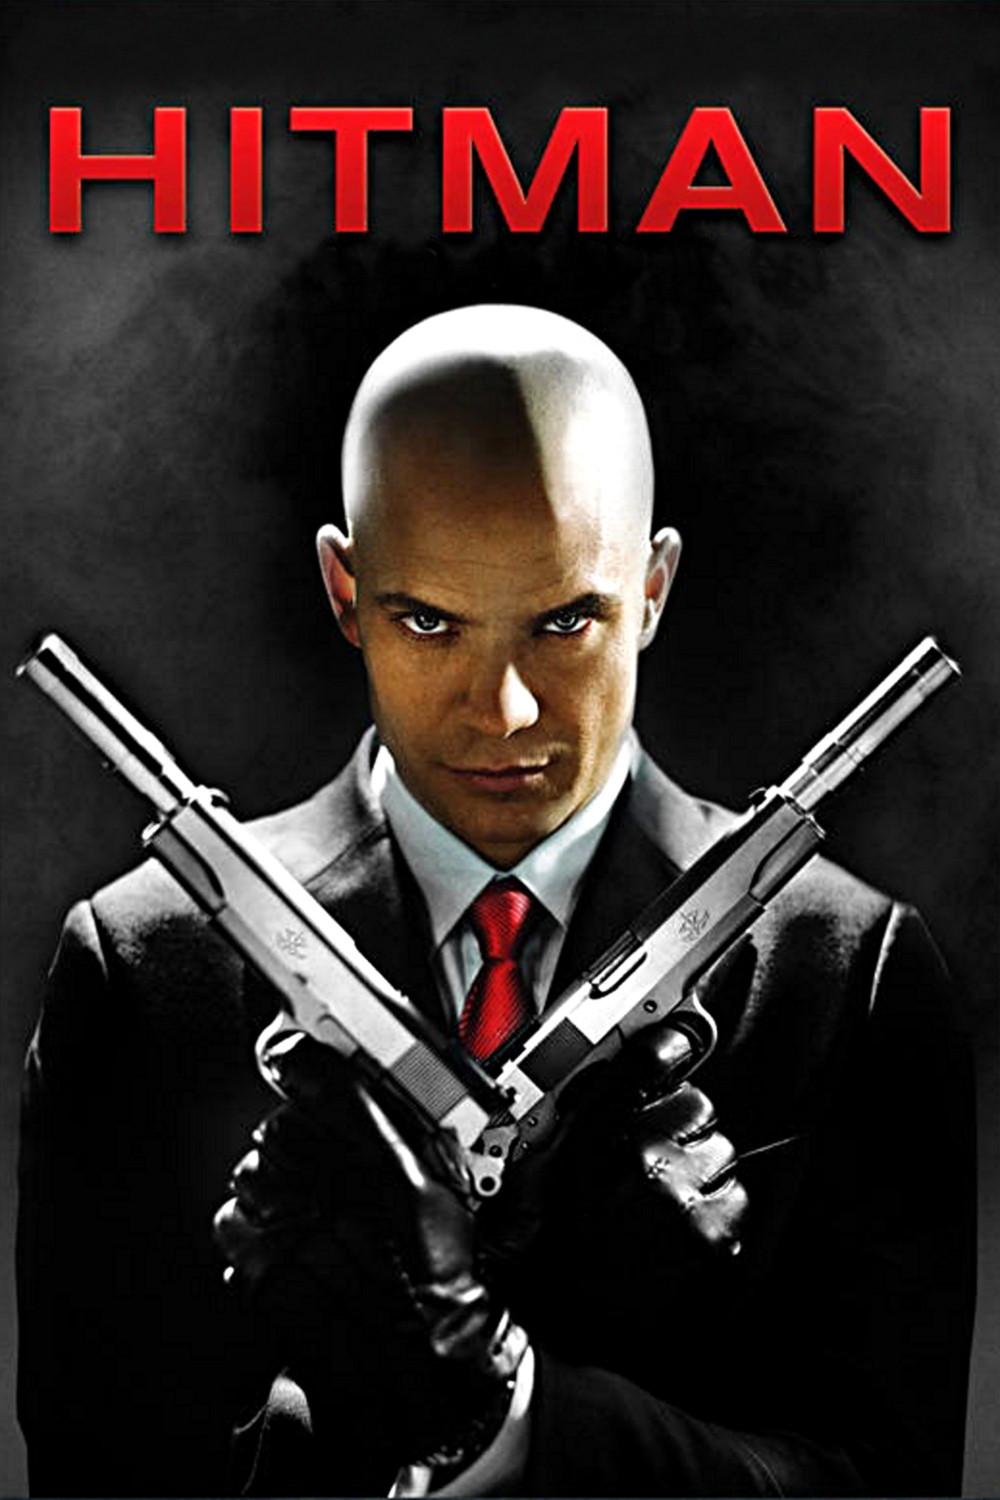 download hitman game for pc free